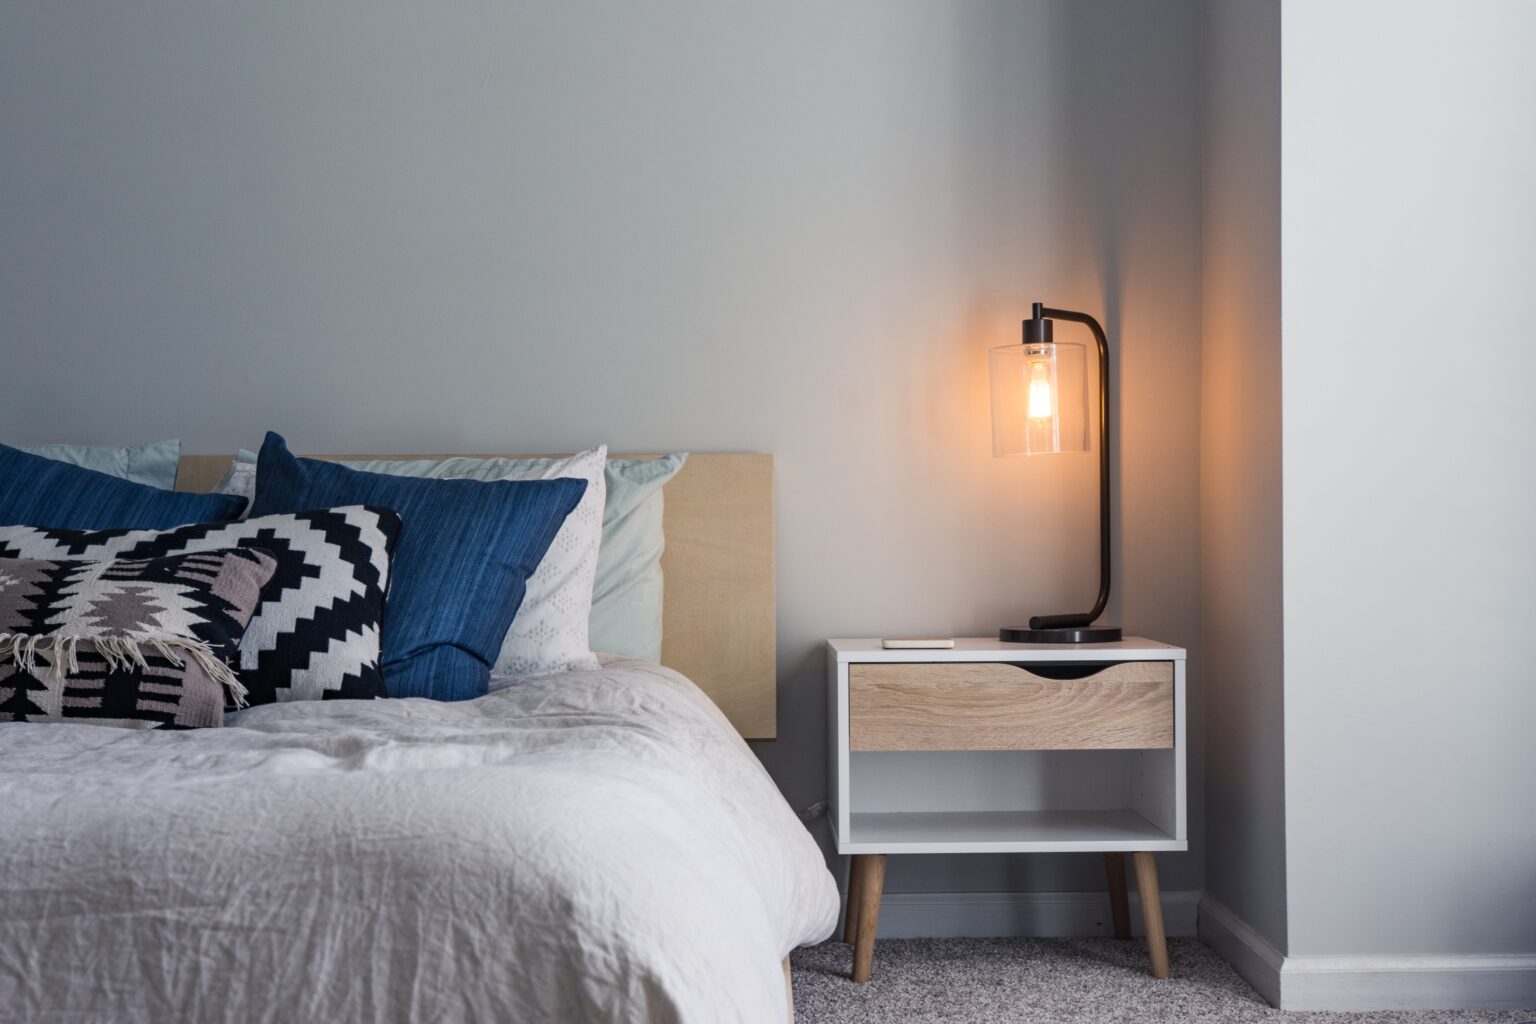 Photo of a bed and a nightstand with a light turned on.